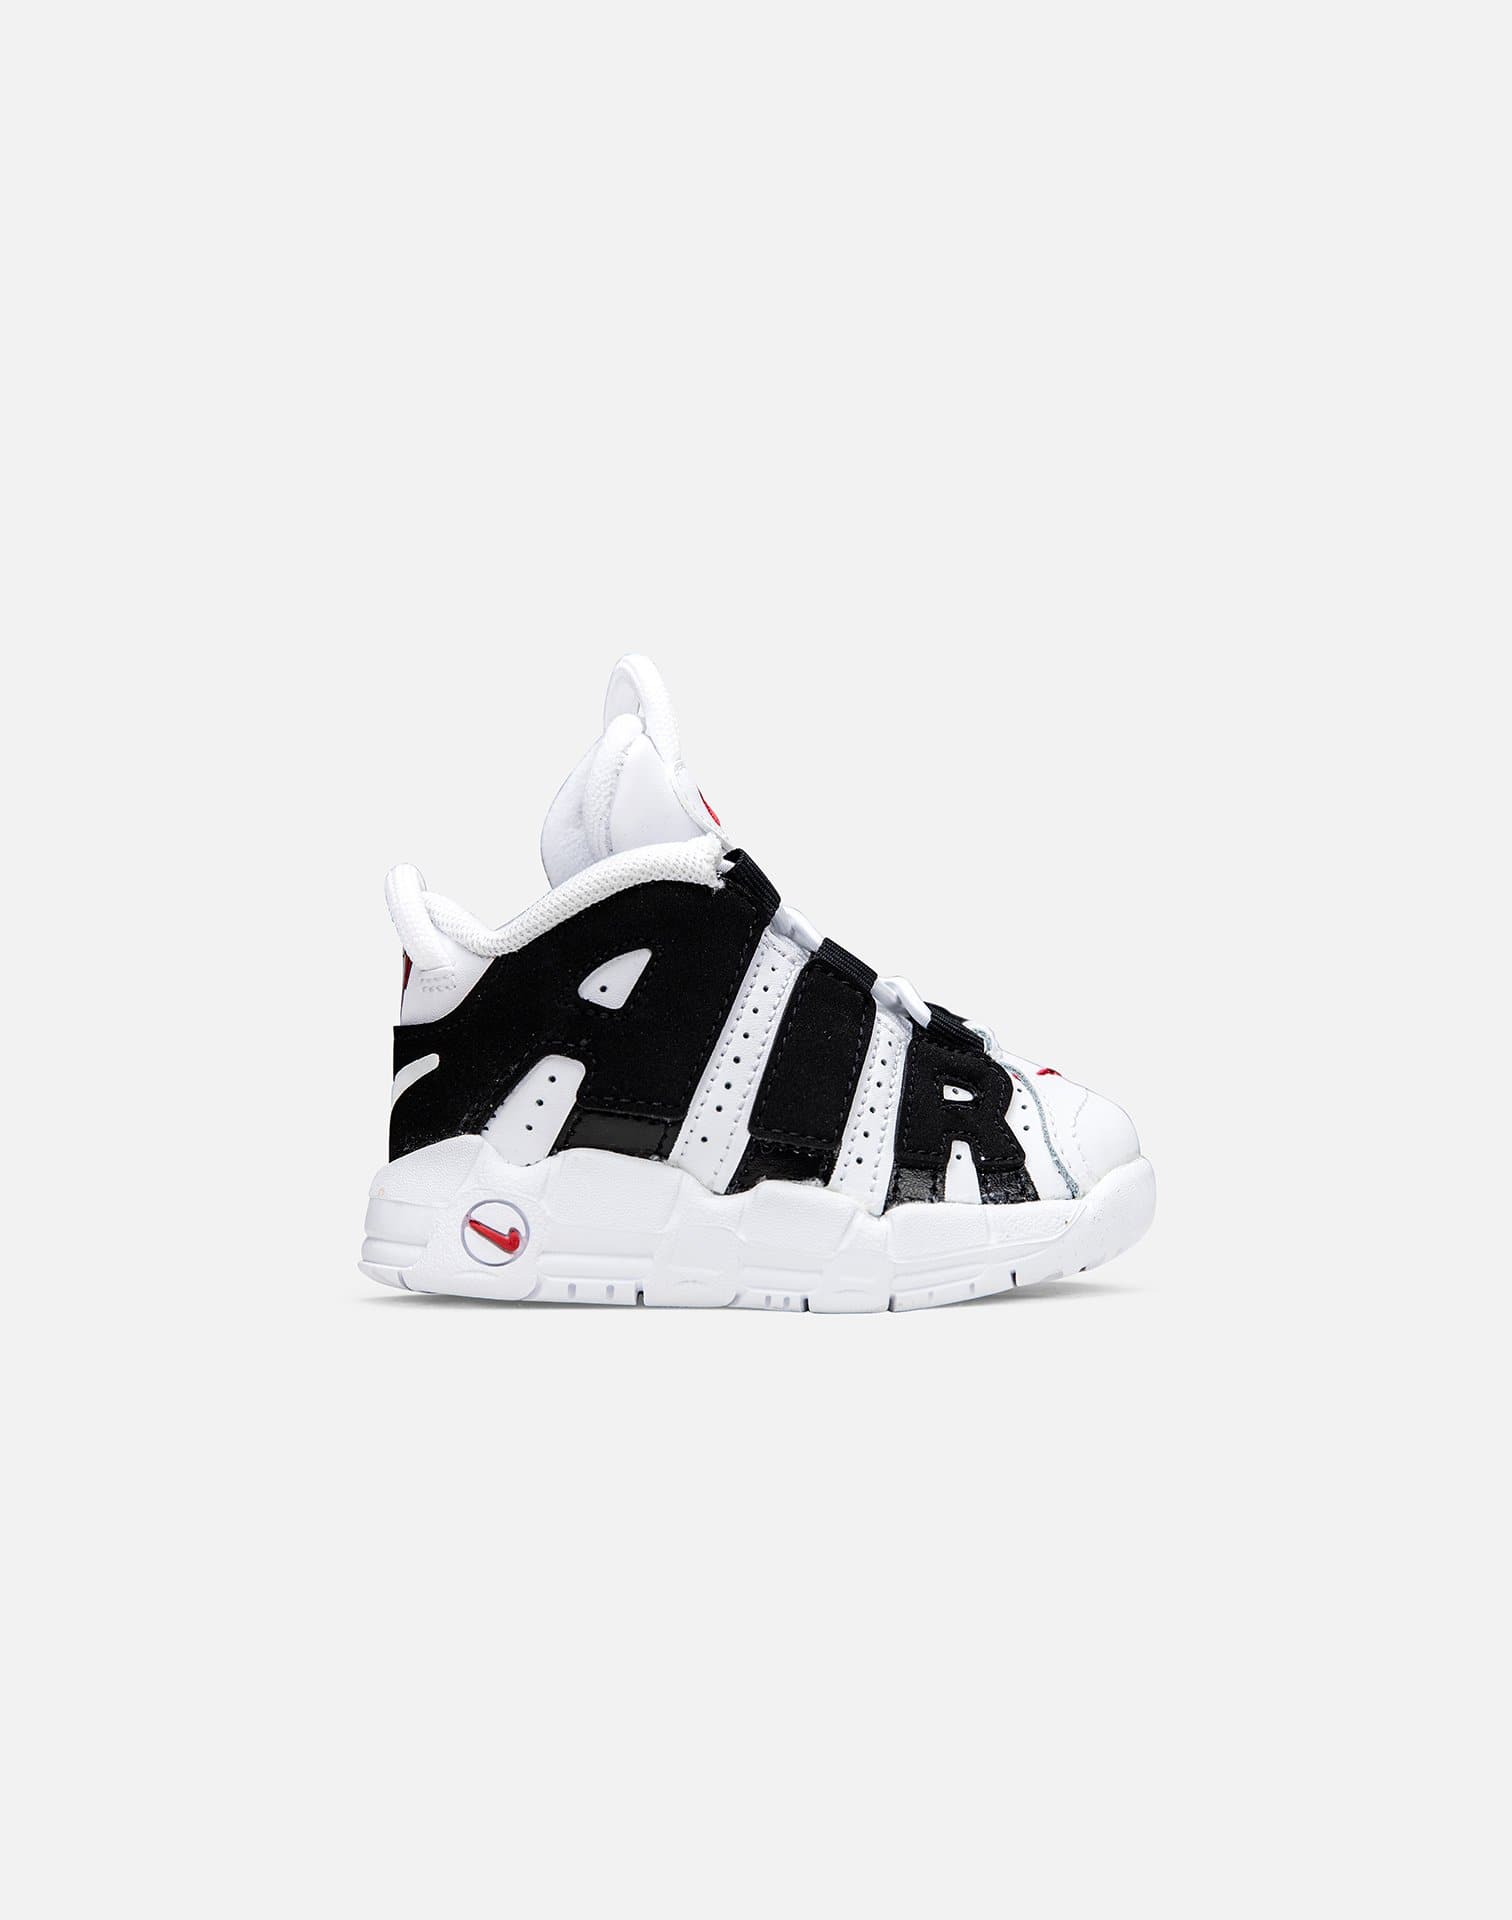 uptempo toddler size